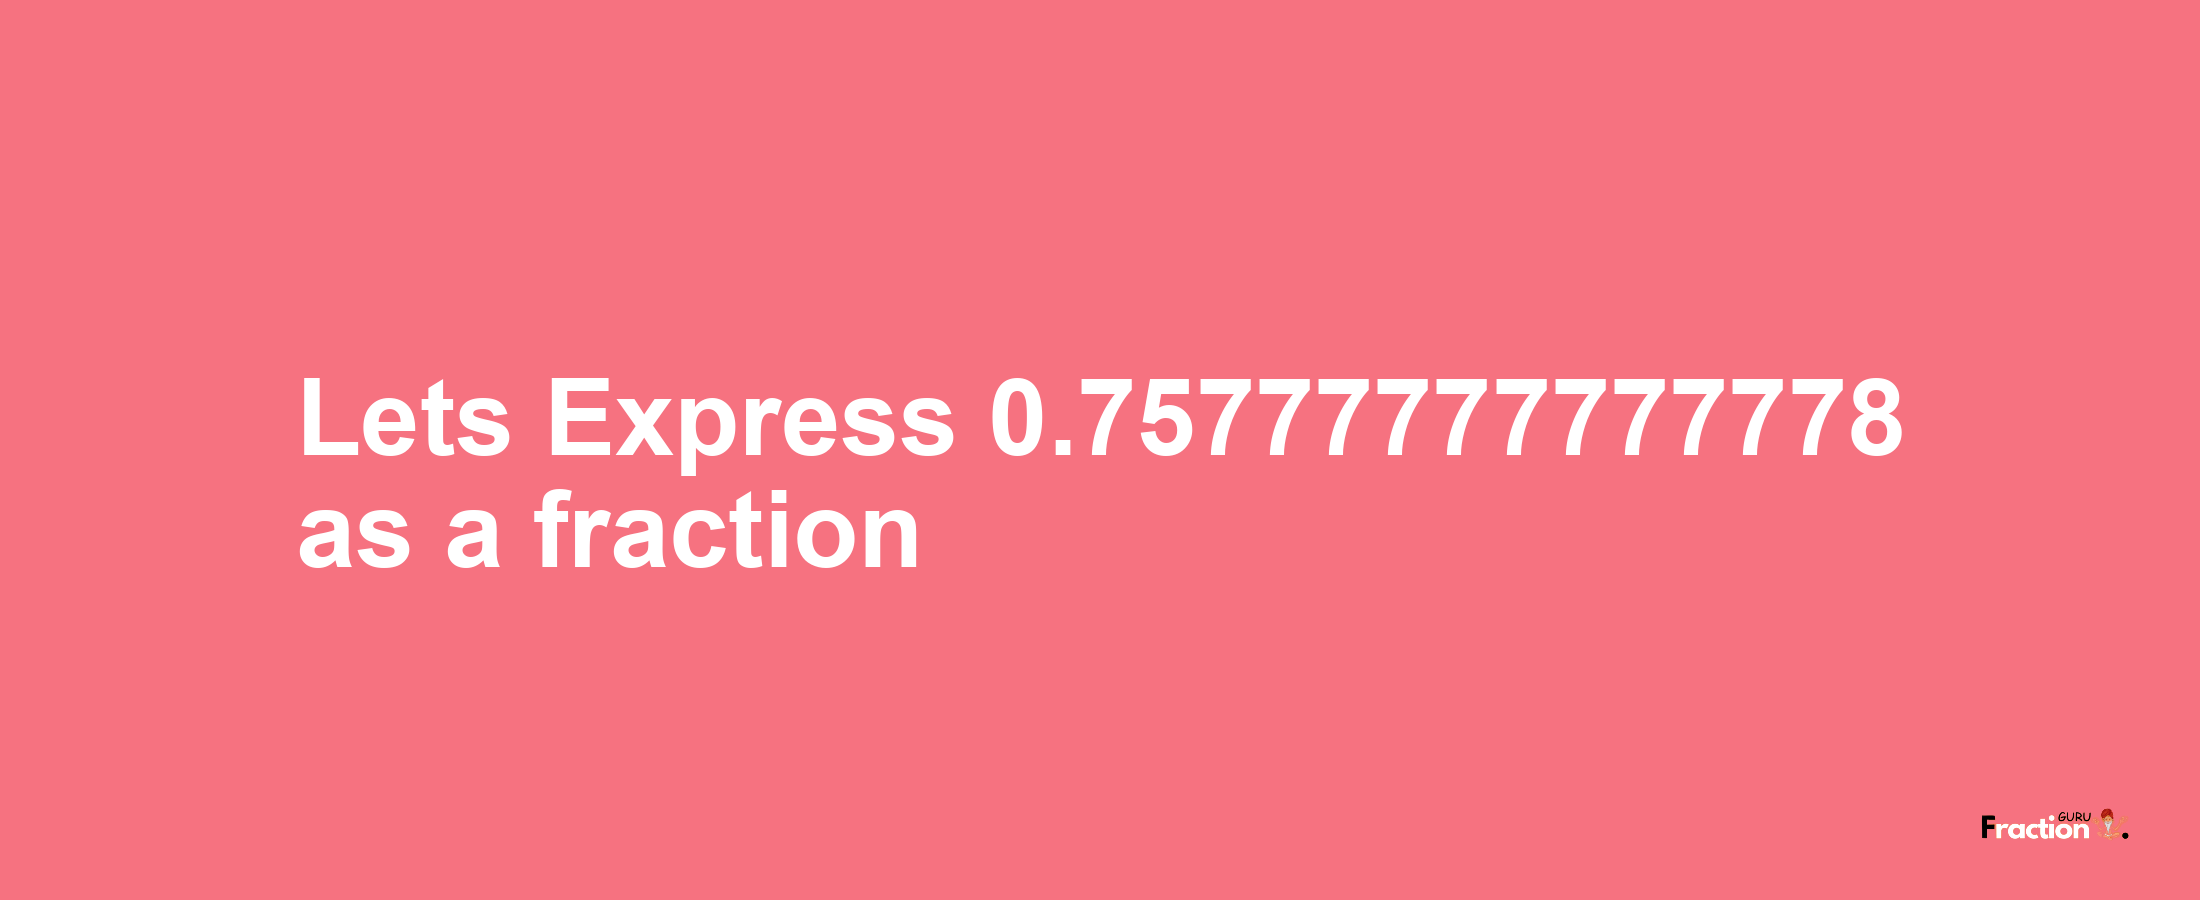 Lets Express 0.75777777777778 as afraction